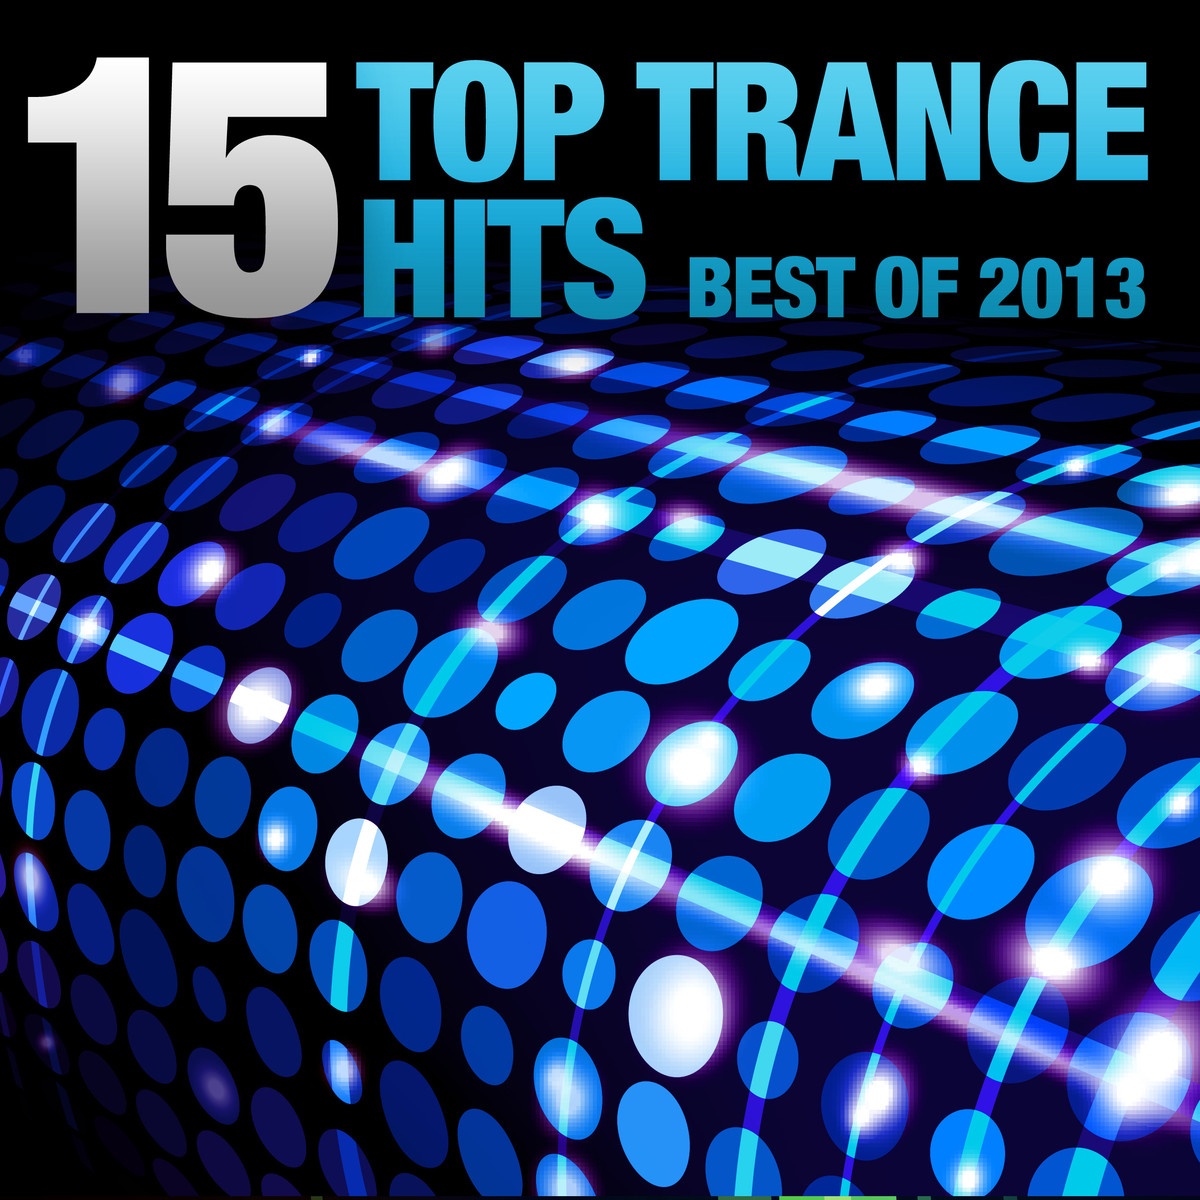 15 Top Trance Hits - Best Of 2013